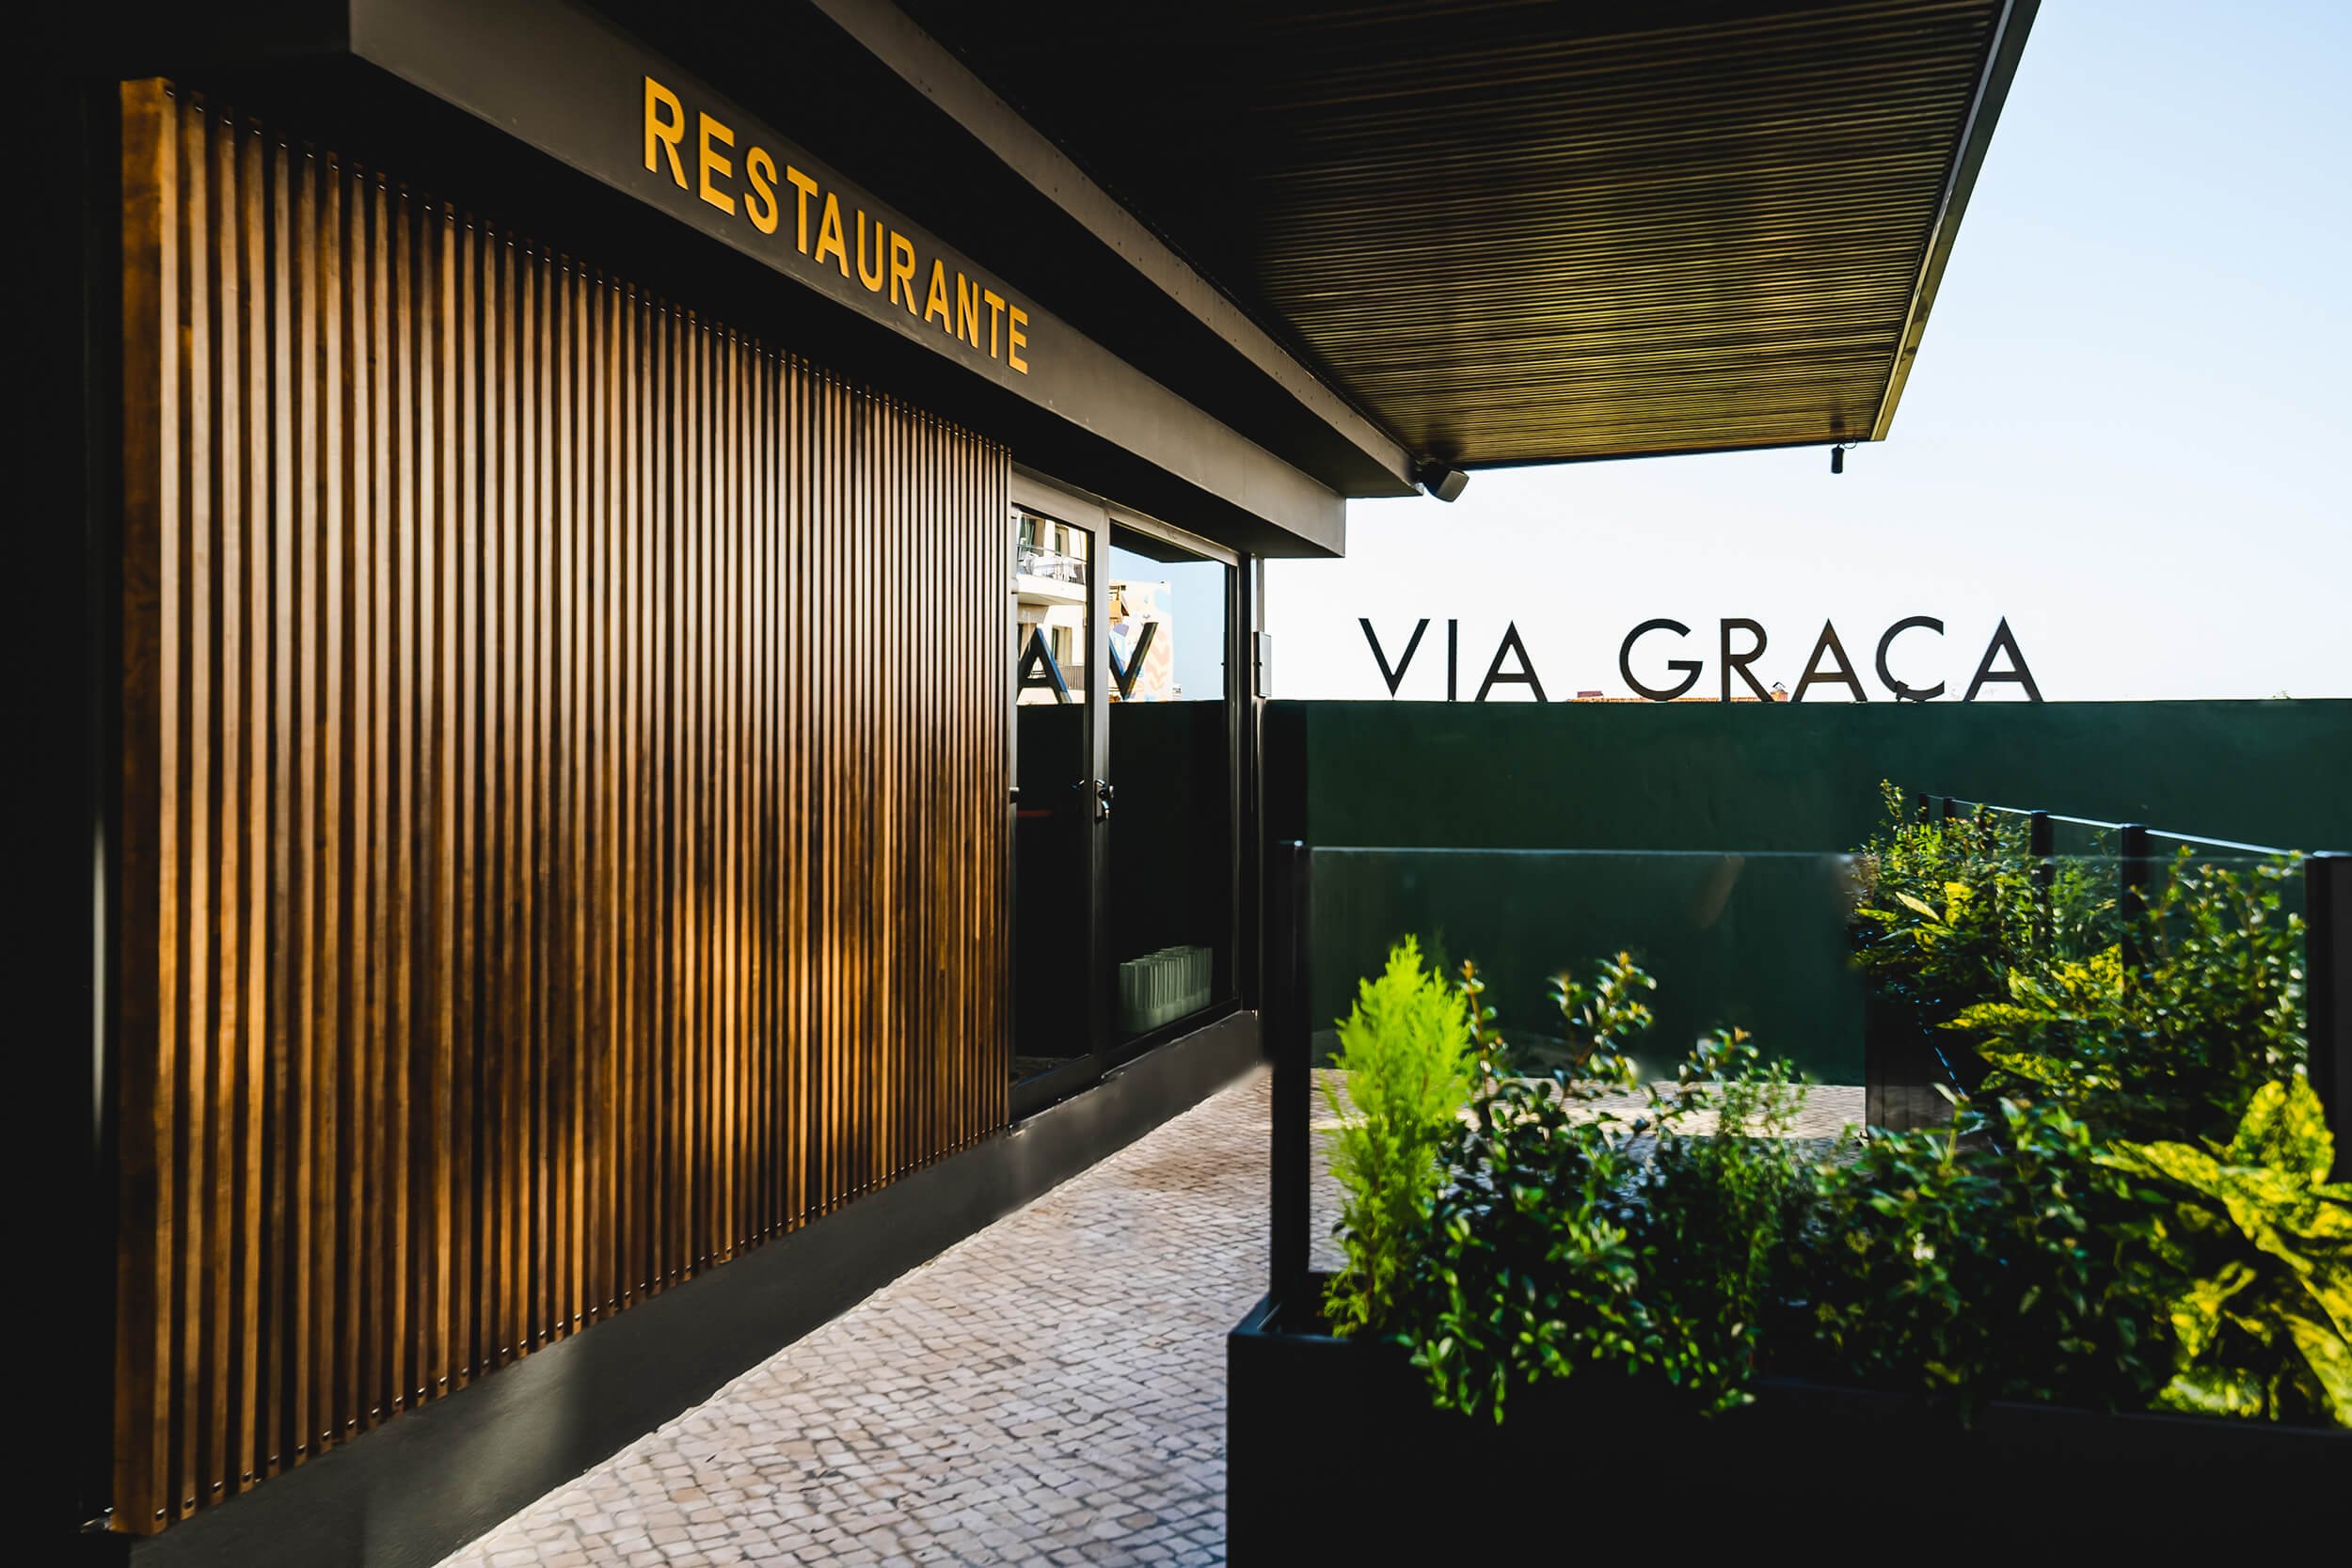 Entrance decorated with wood and green tones, with bold letters "Via Gracia"